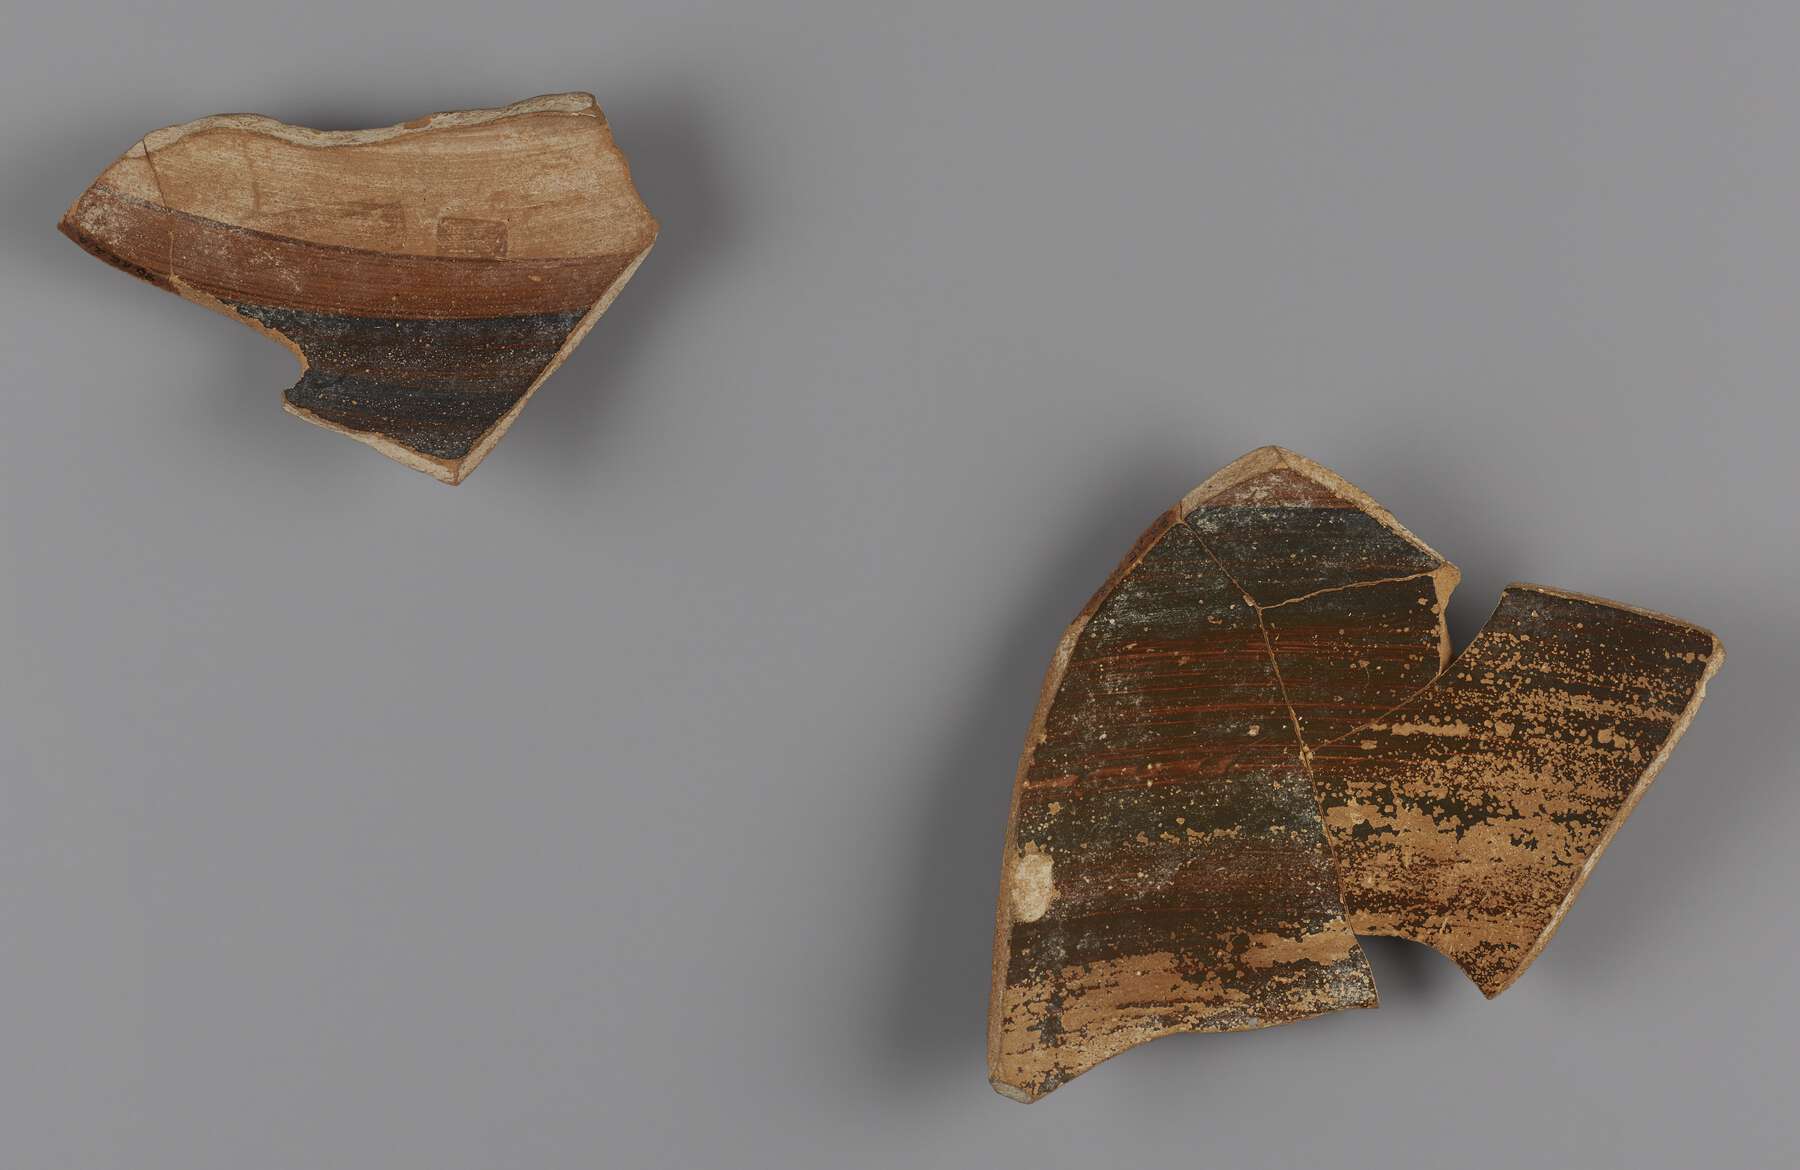 The back side of the two pottery fragments